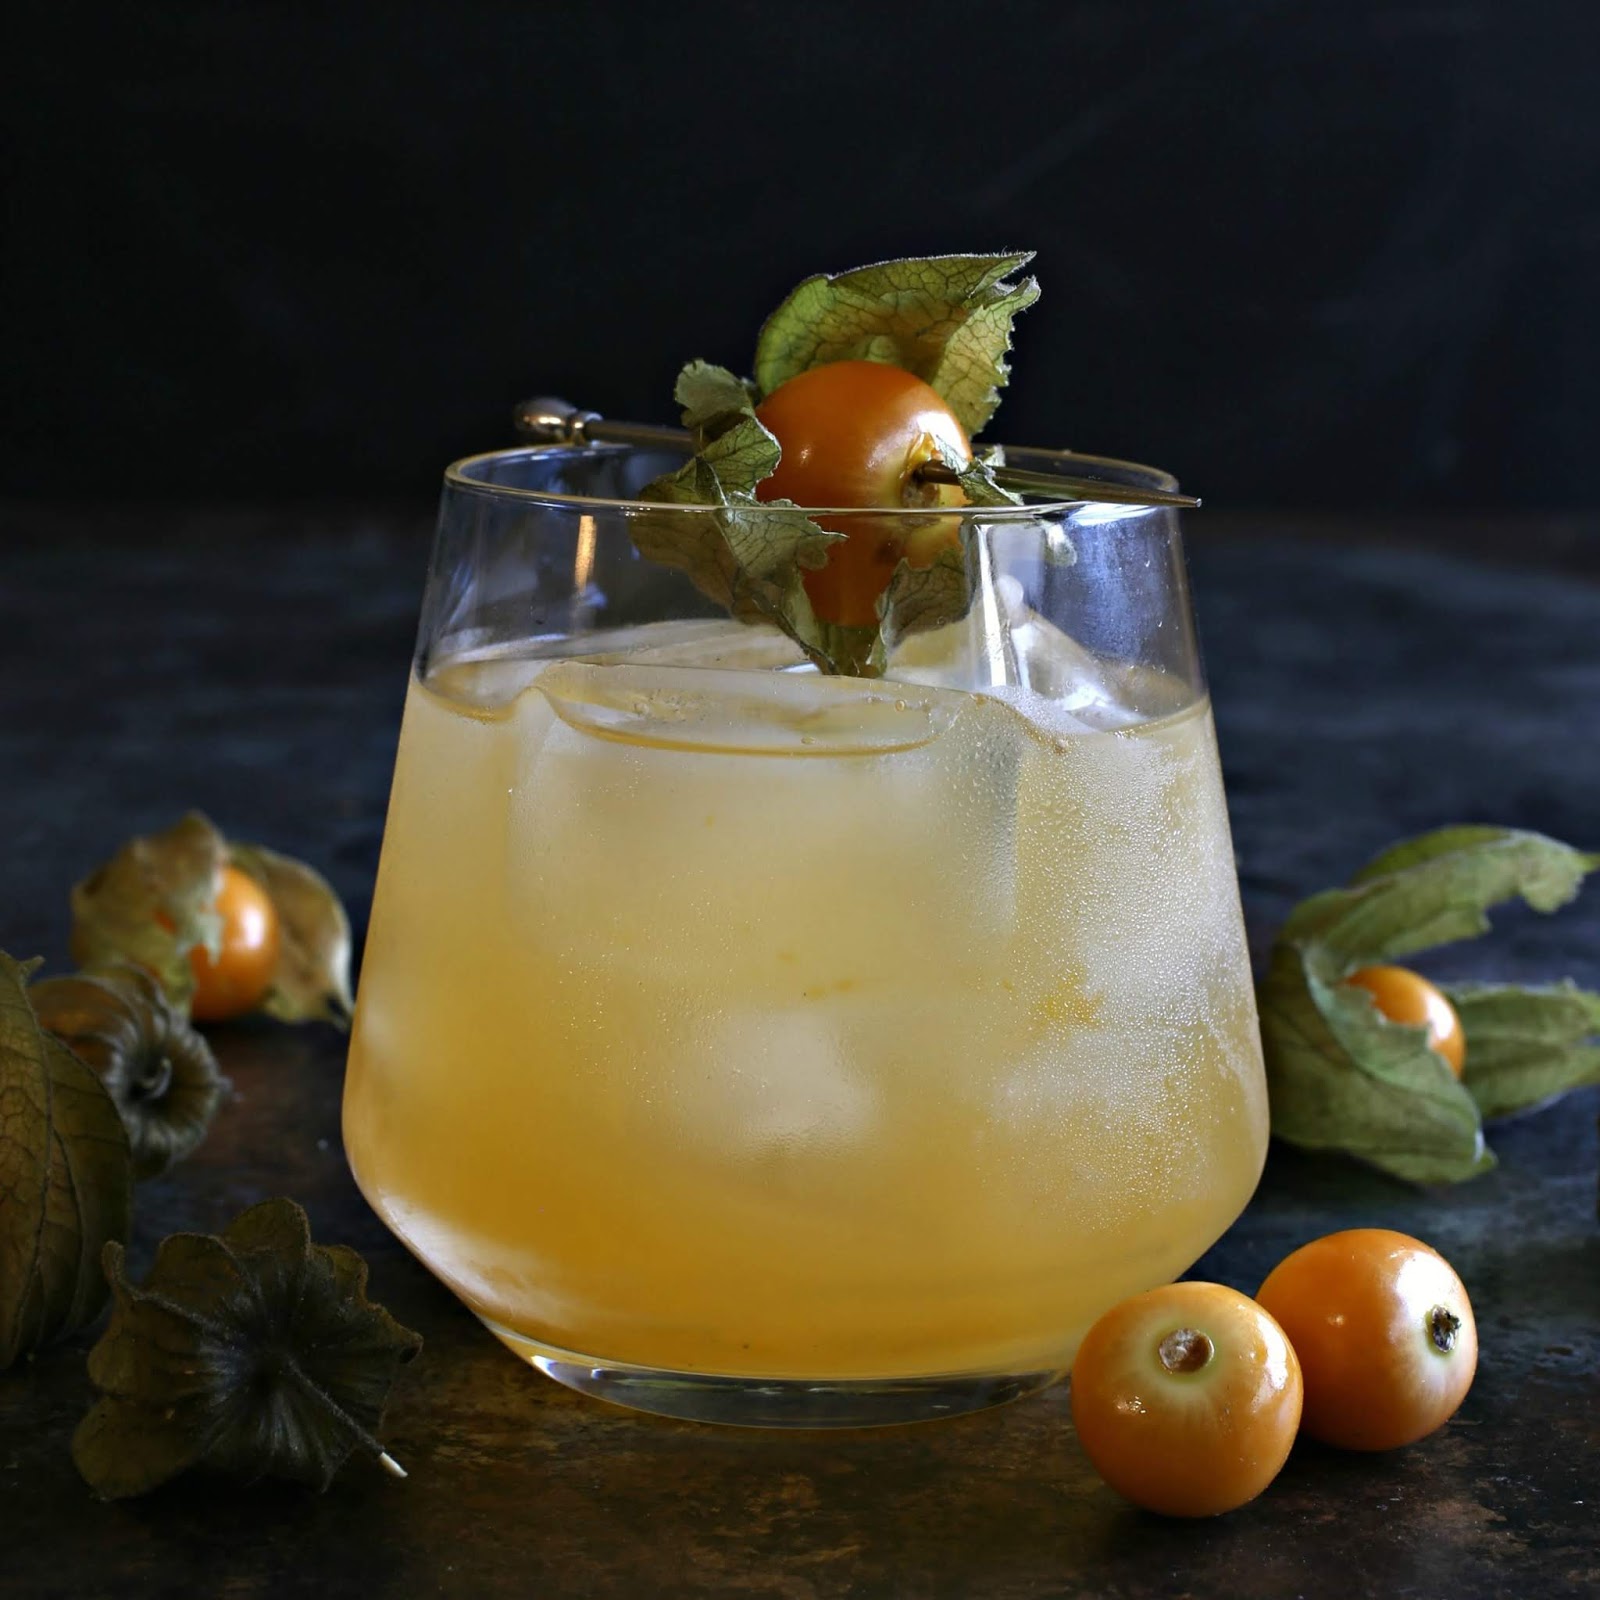 Gin cocktail flavored with fresh cape gooseberries and elderflower liqueur.